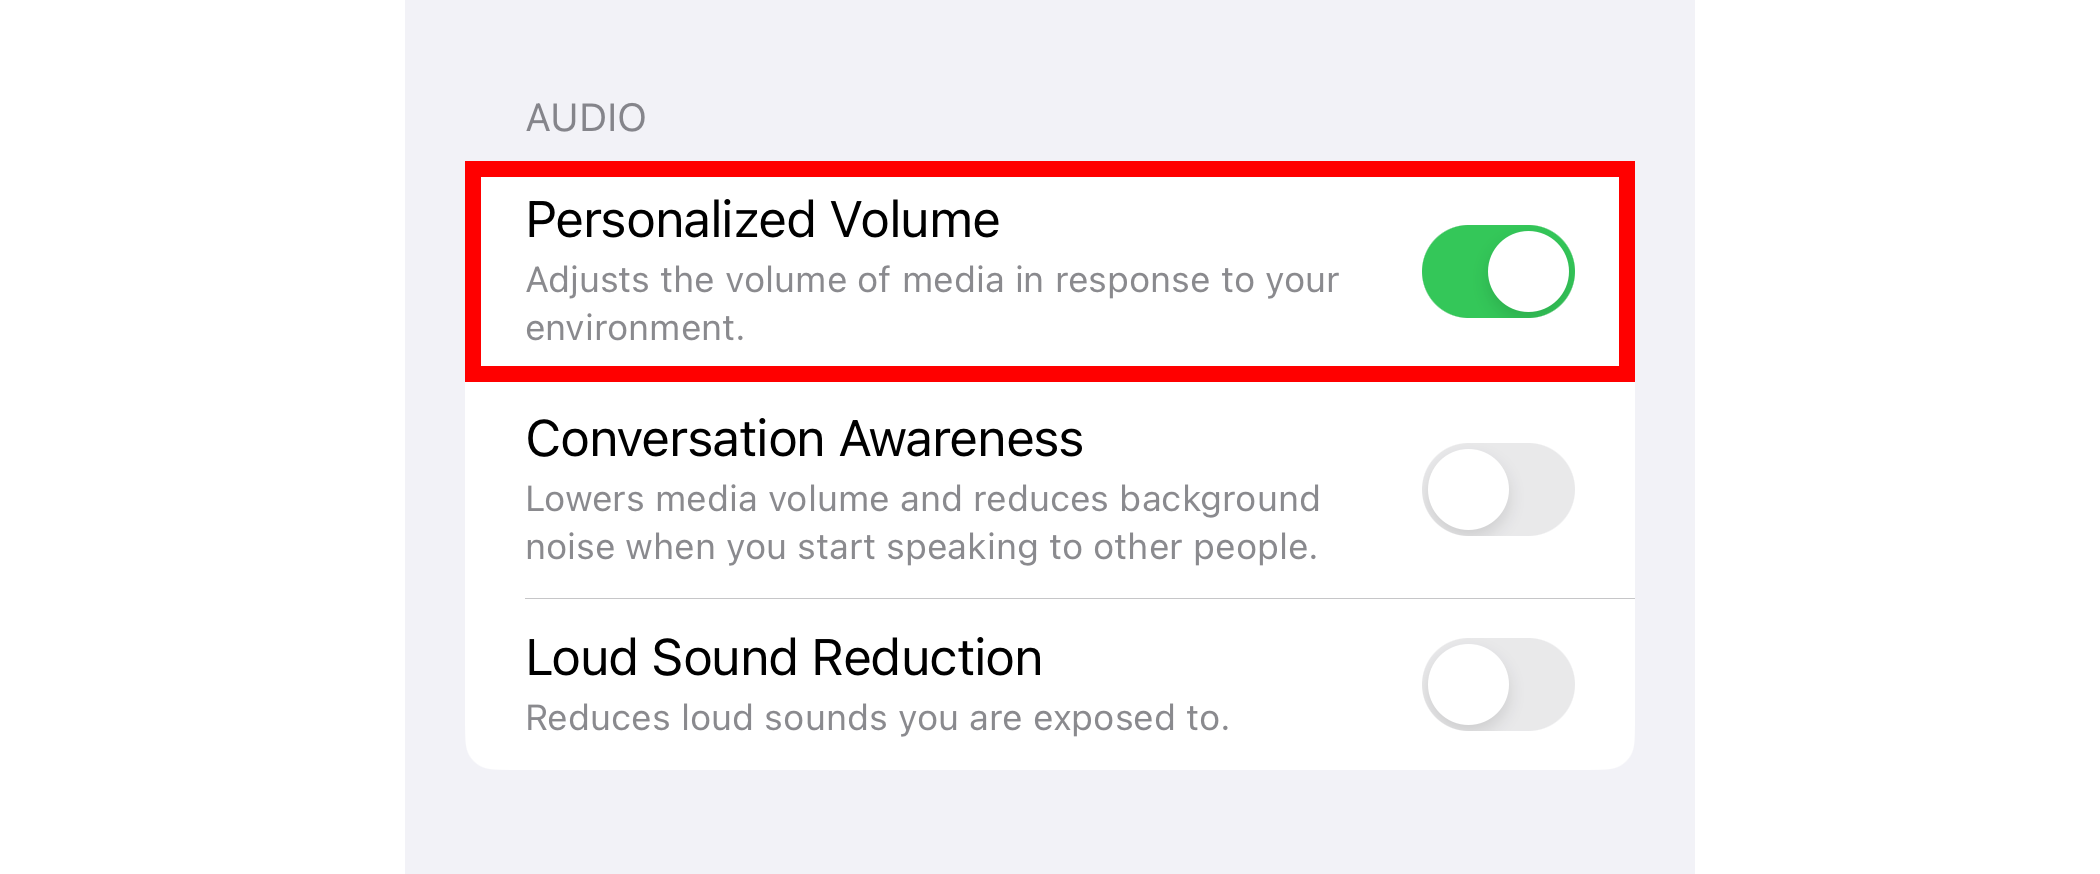 AirPods settings on iPhone with the Personalized Volume audio option enabled.